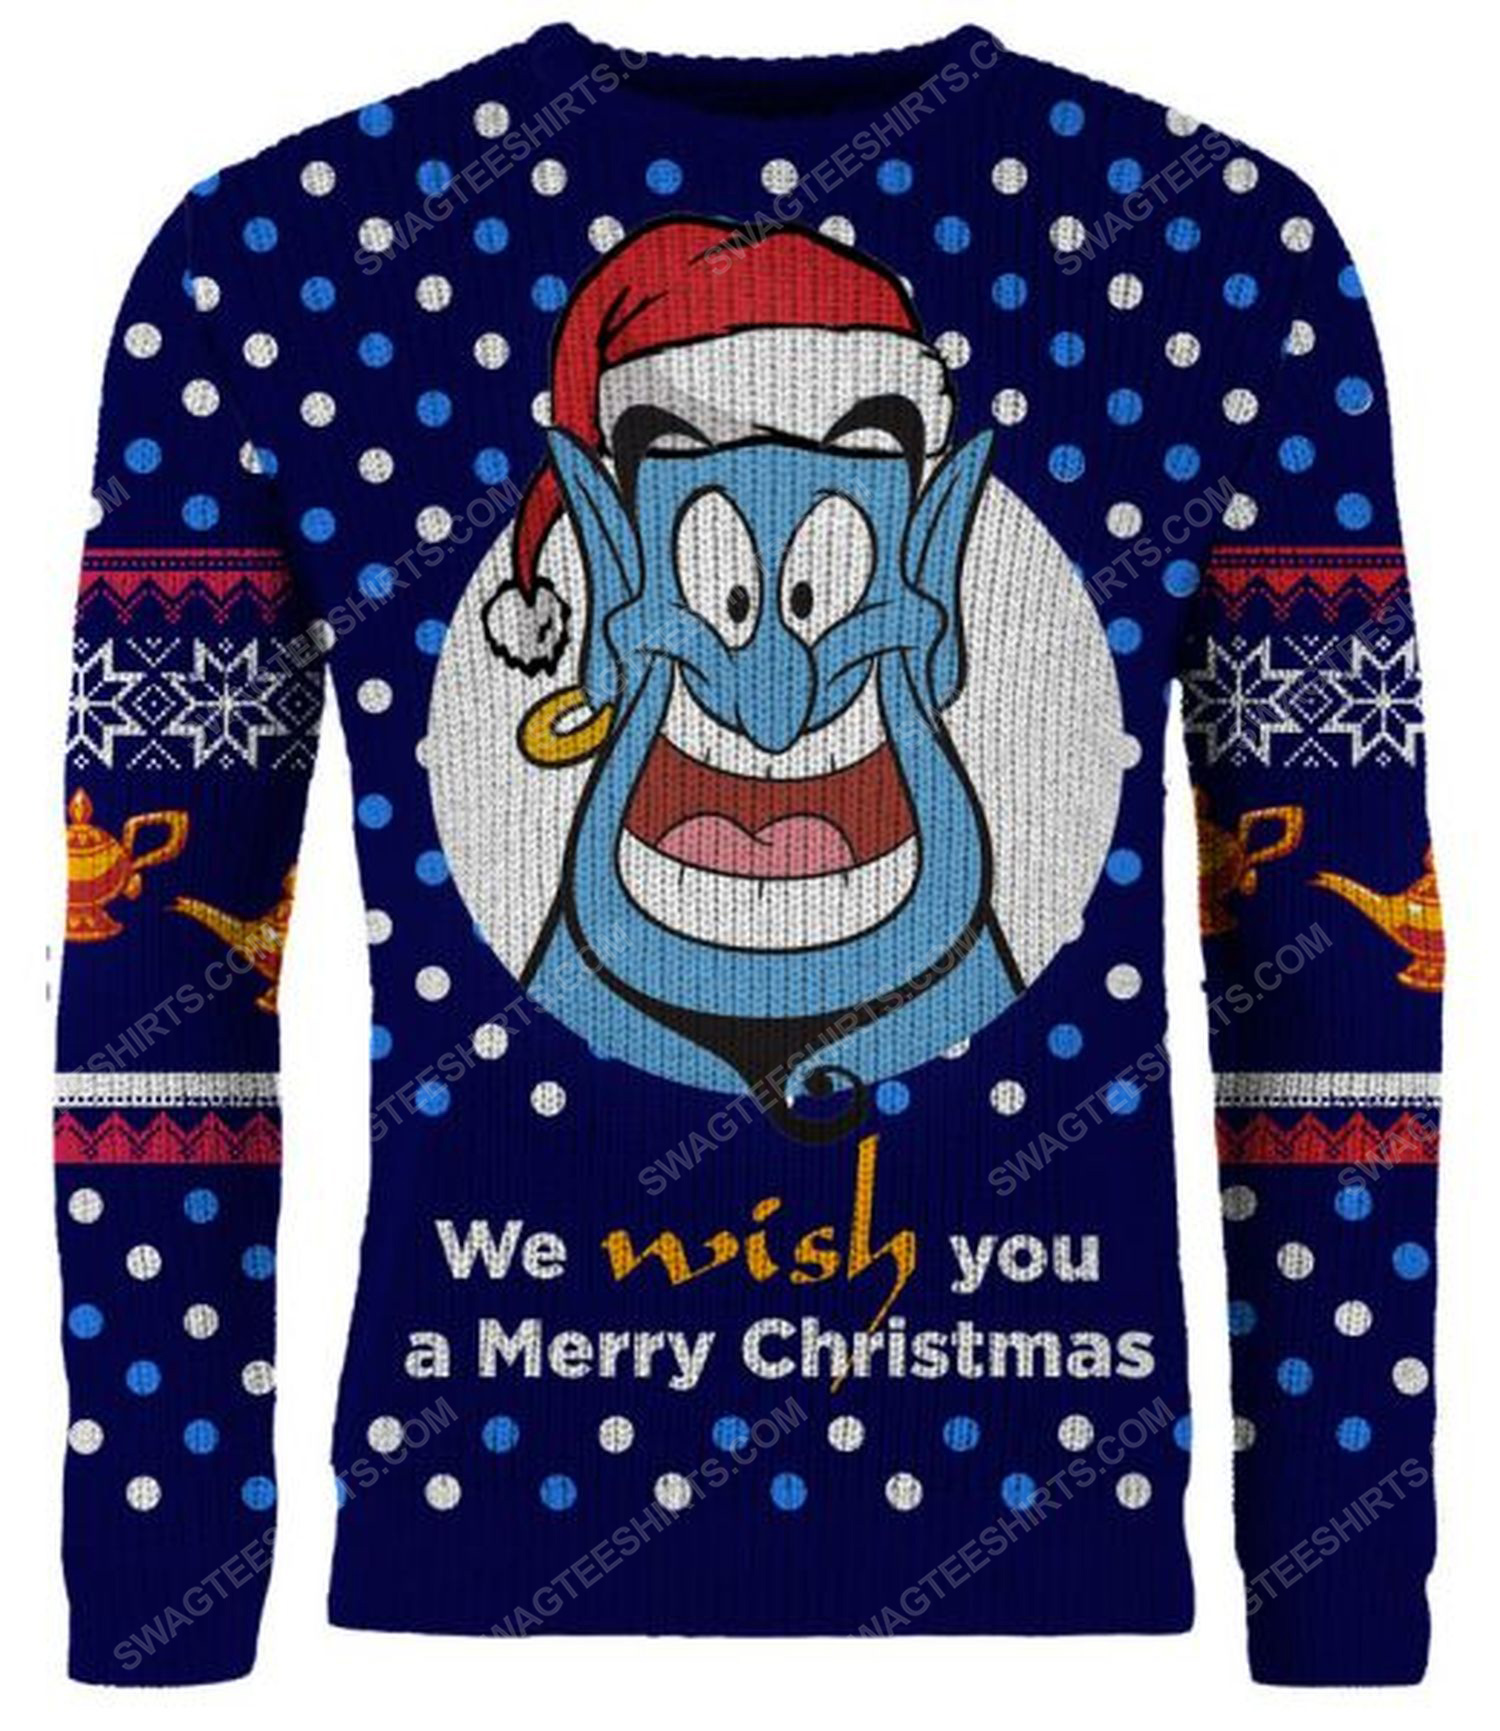 [special edition] Aladdin we wish you a merry christmas full print ugly christmas sweater – maria